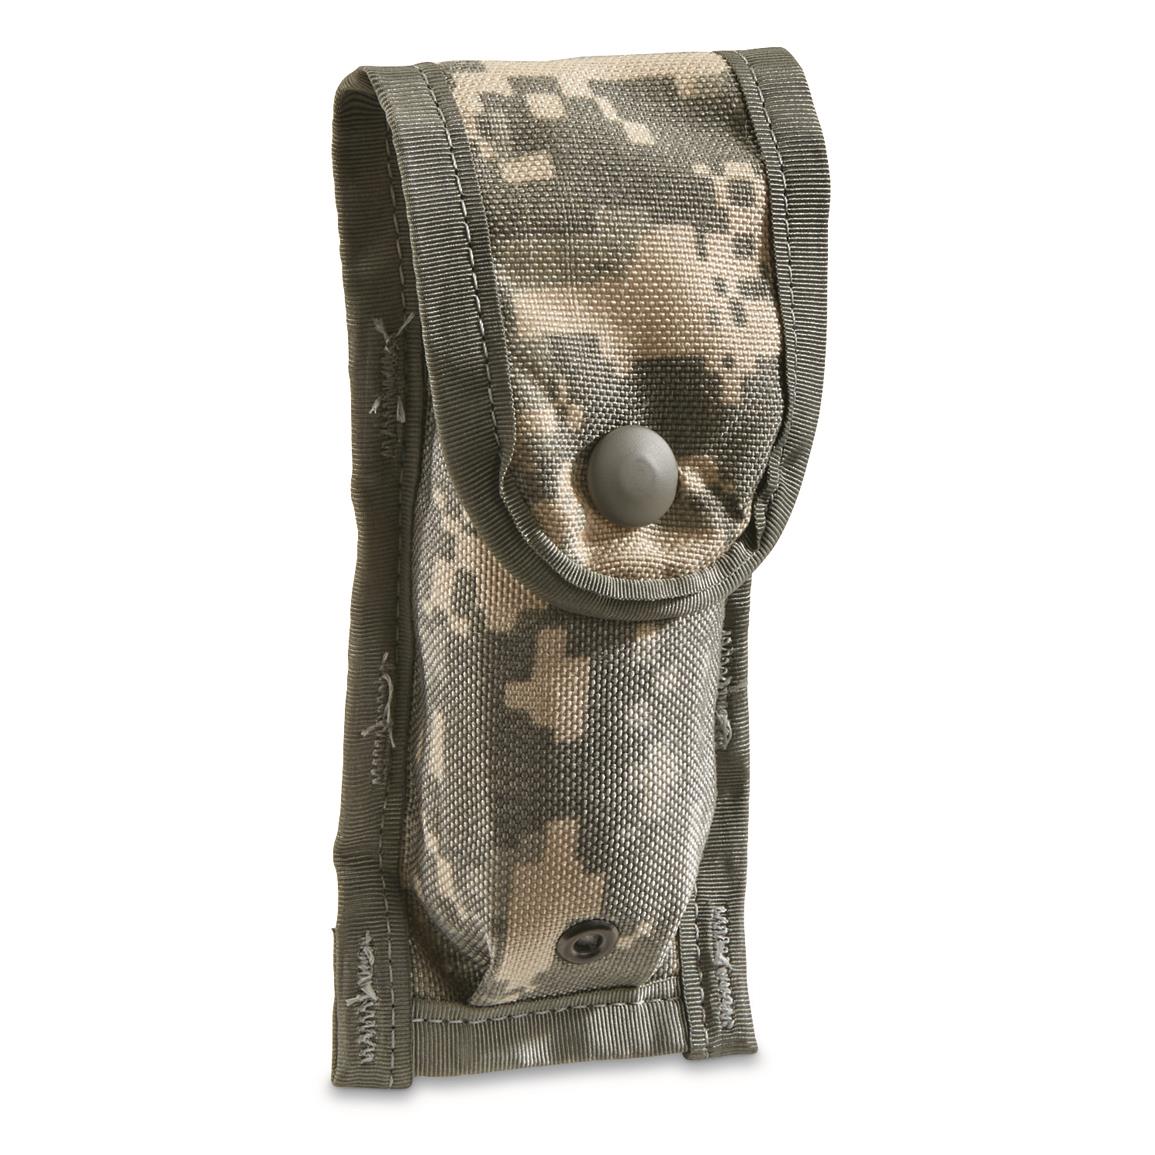 U.S. Military Surplus 9mm Single Mag Pouches, 2 Pack, New, ACU